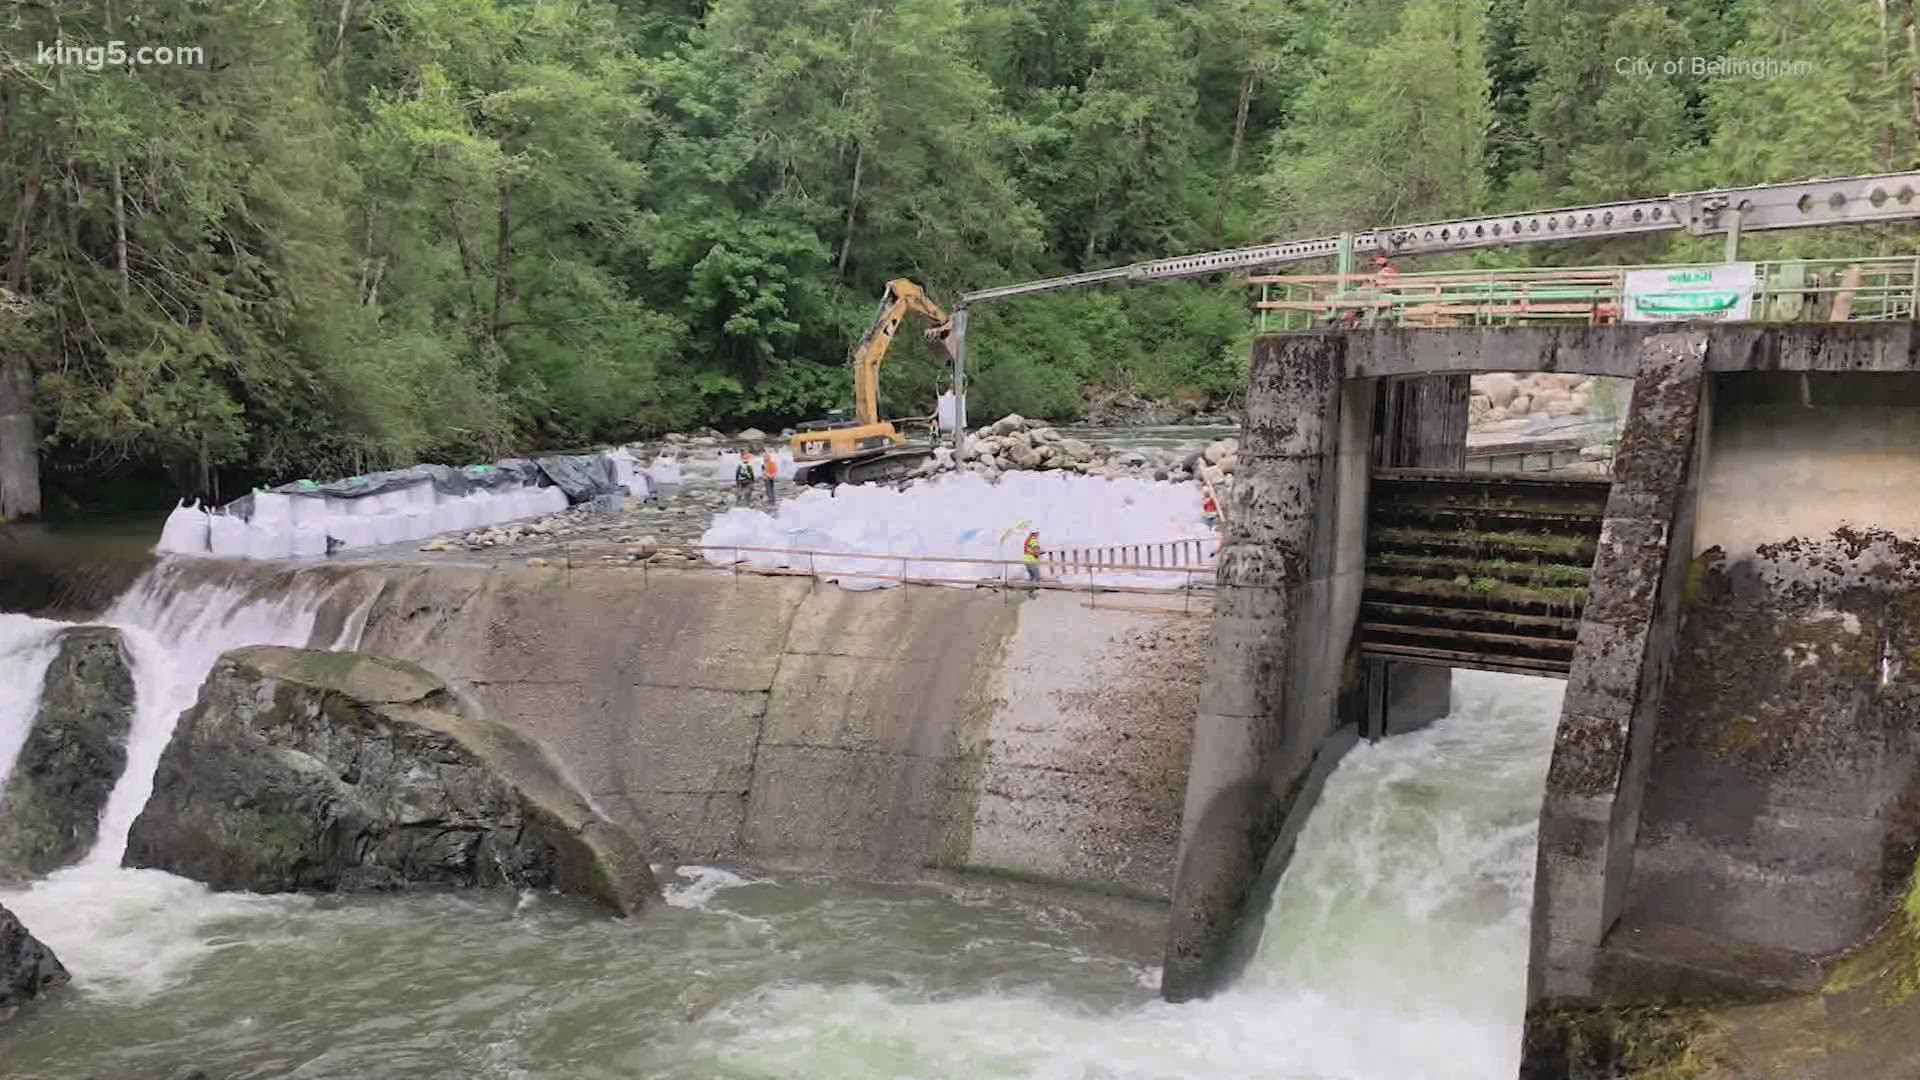 This is a historic step in restoring salmon habitat.